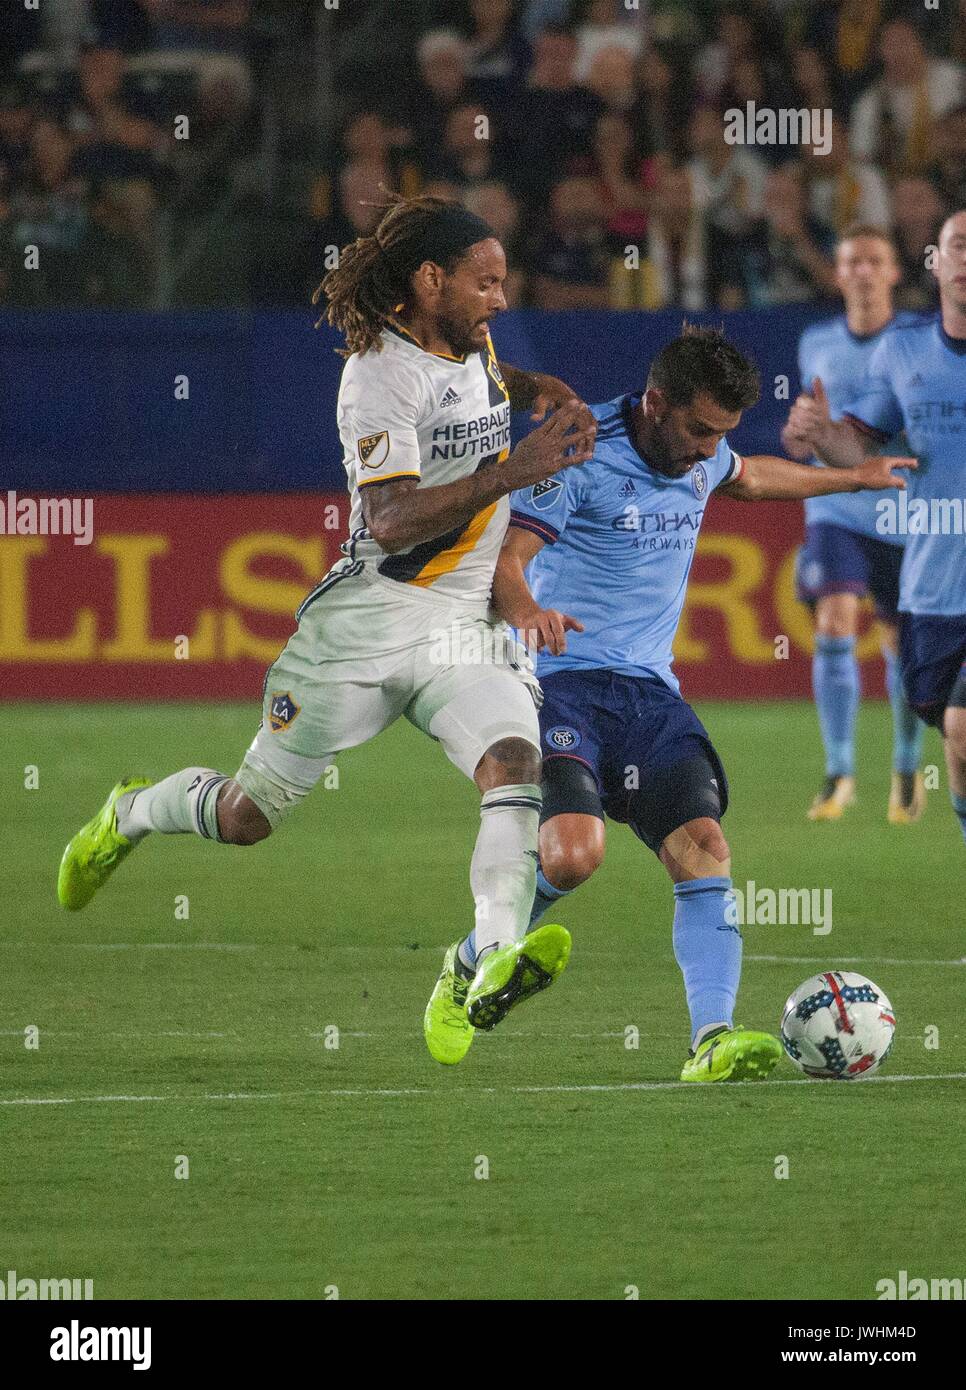 Carson, USA. 12th Aug, 2017. Jermaine Jones (L) of the Los Angeles Galaxy vies with David Villa of New York FC during the 2017 Major League Soccer (MLS) match between Los Angeles Galaxy and New York FC in Carson, California, the U.S., Aug. 12, 2017. Credit: Javier Rojas/Xinhua/Alamy Live News Stock Photo